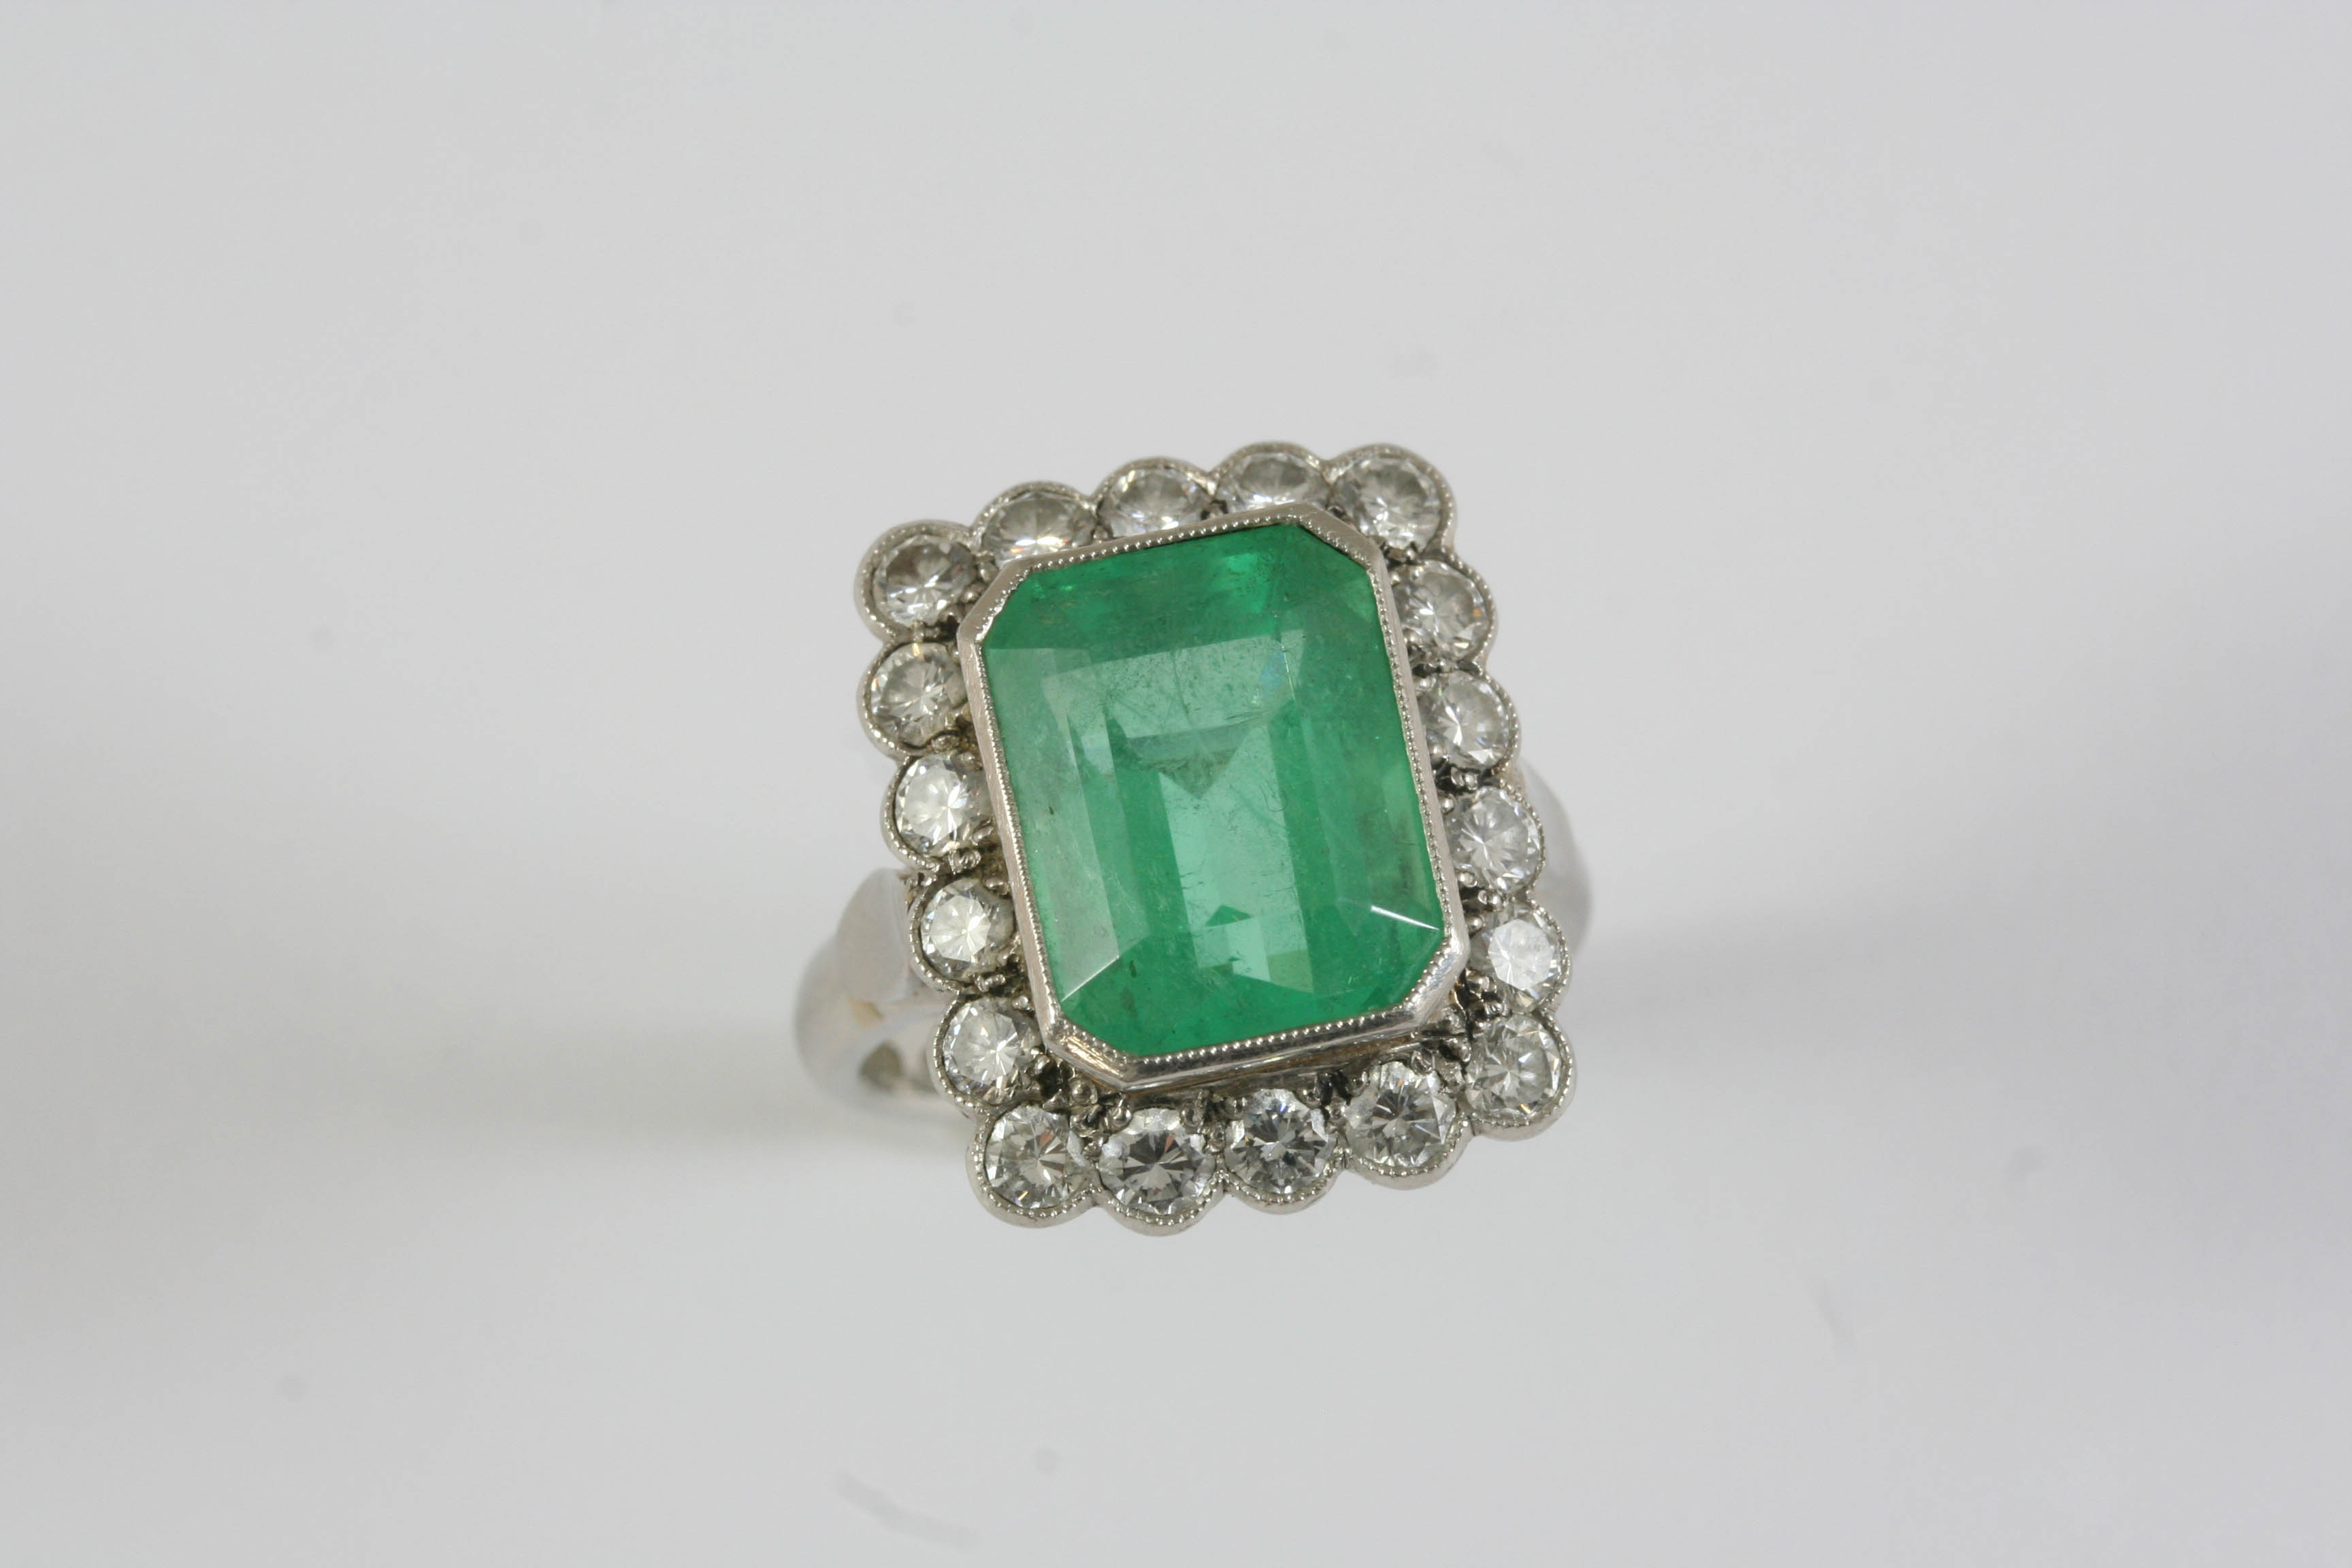 AN EMERALD AND DIAMOND CLUSTER RING the cut cornered rectangular shaped emerald weighs 8.10 carats